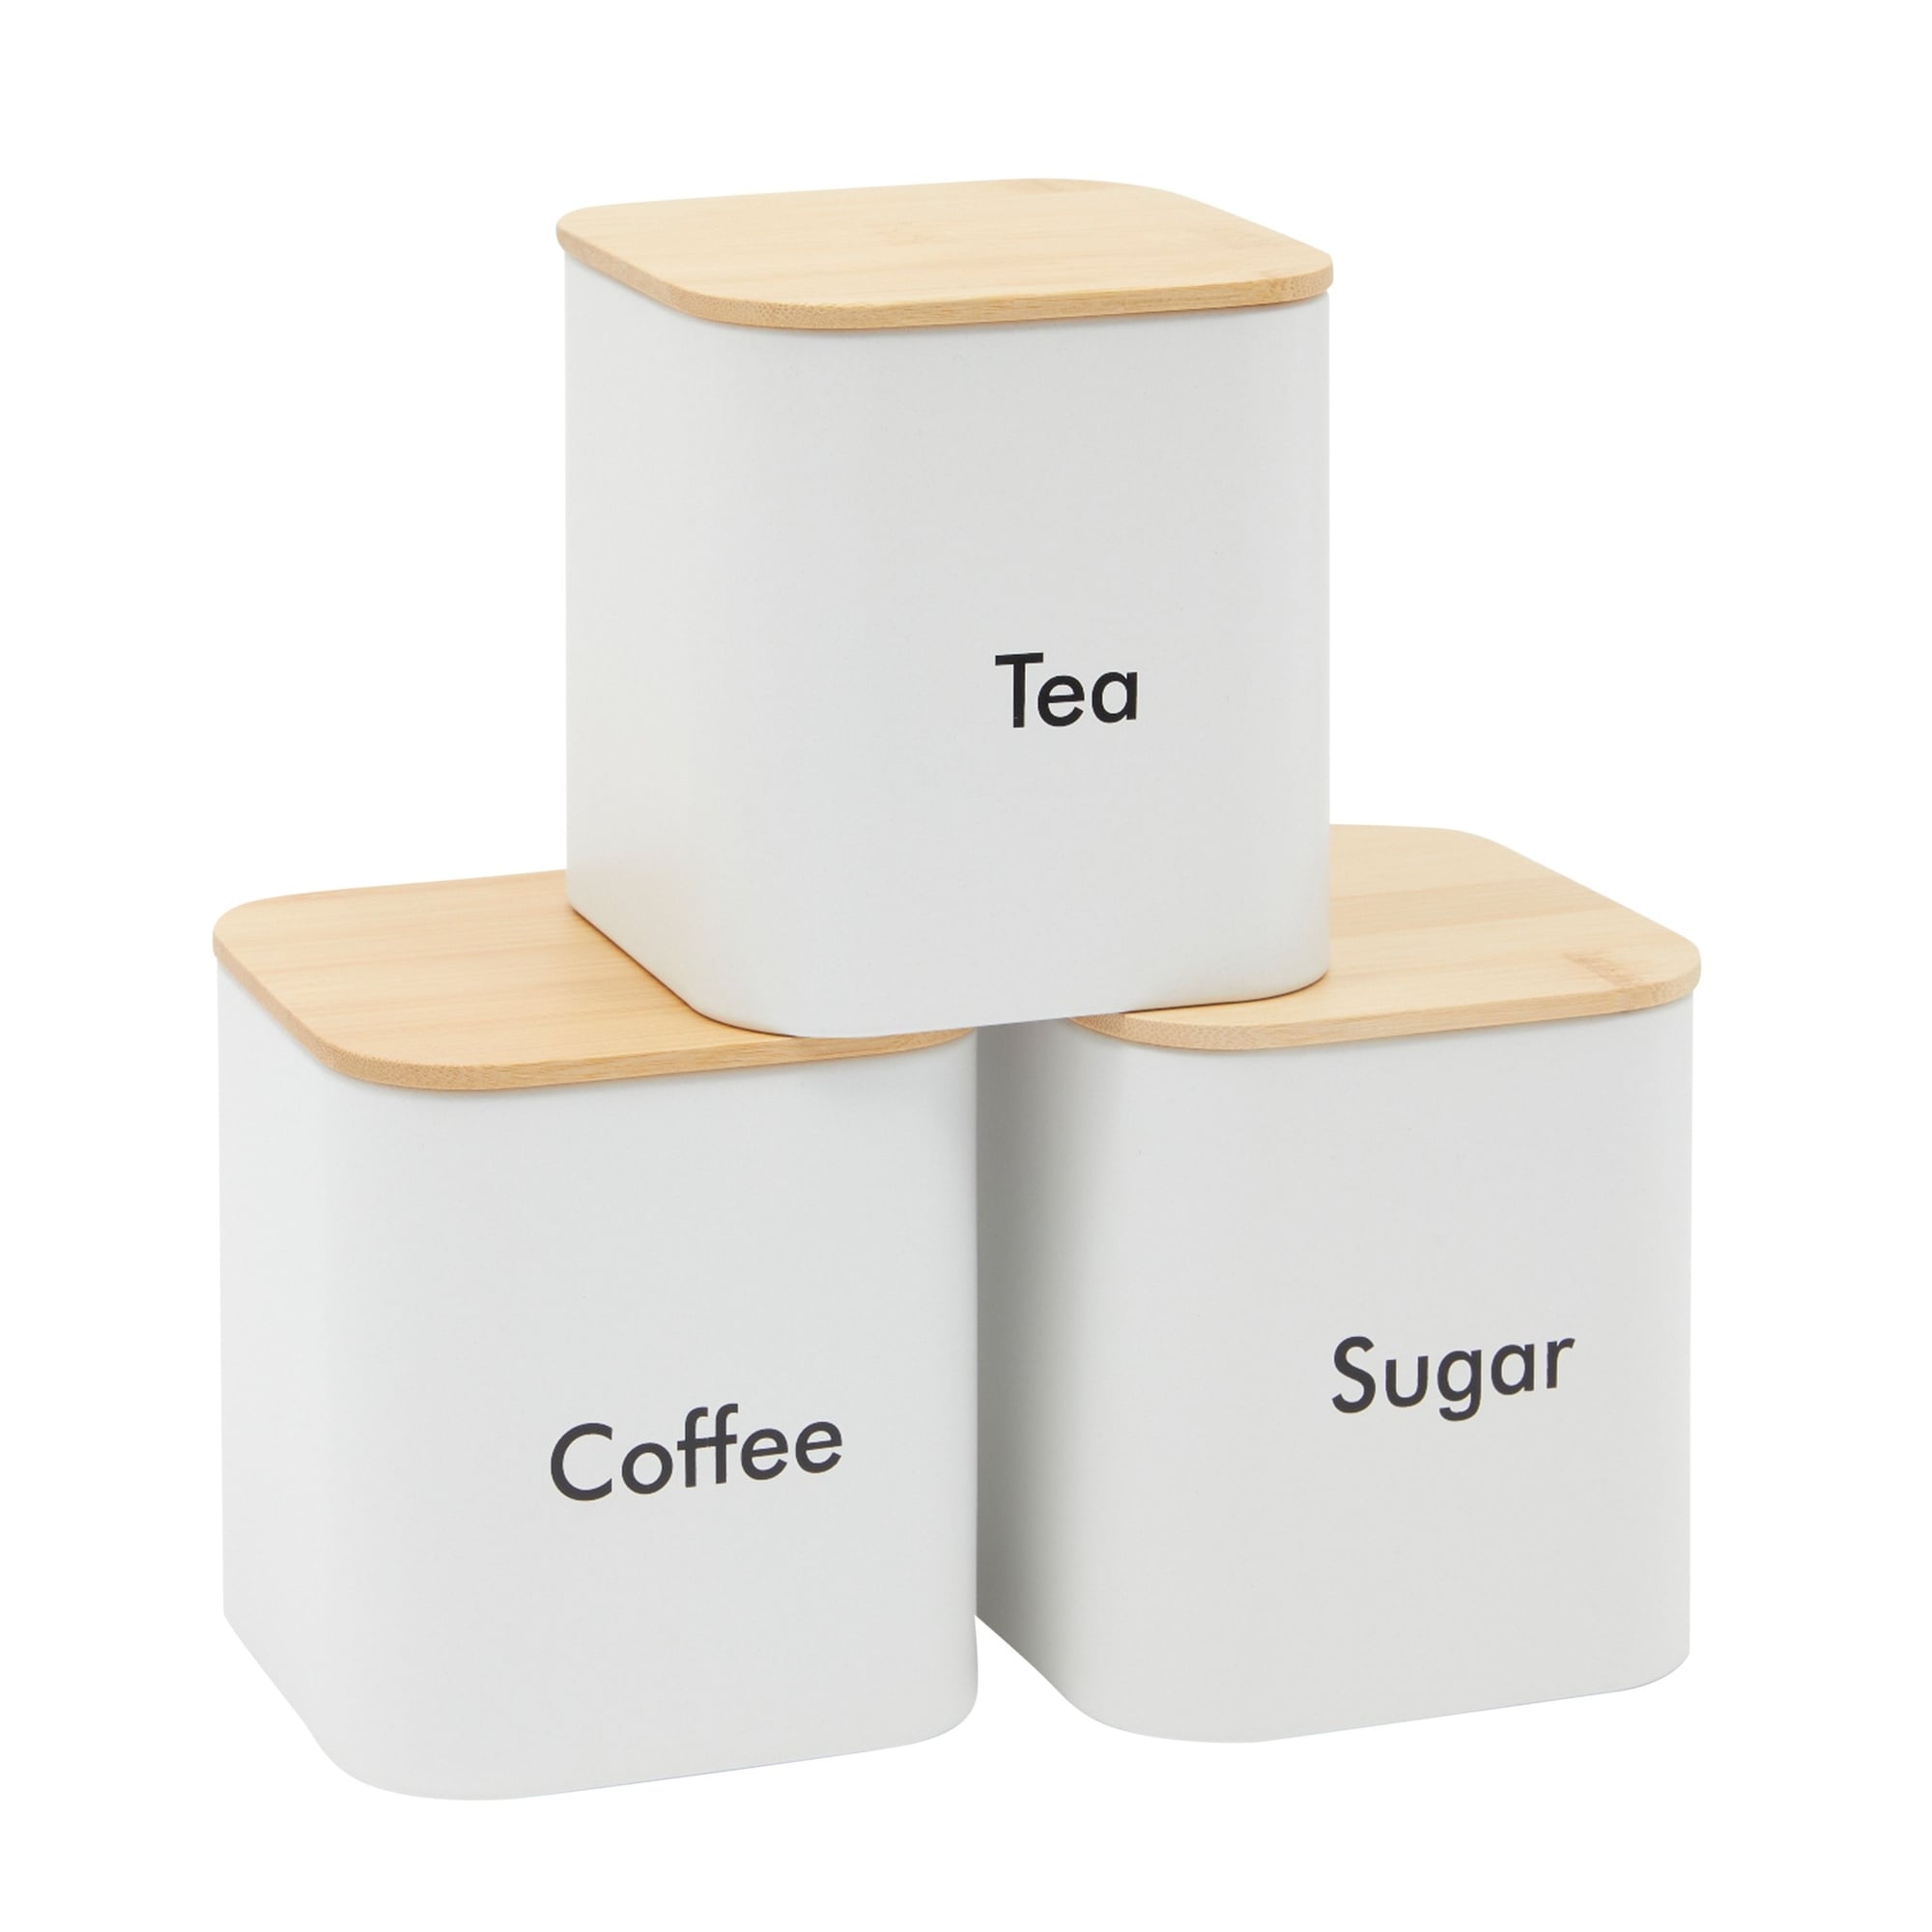 https://ak1.ostkcdn.com/images/products/is/images/direct/3a26d8eb5b96388d3be7fd6ee1c30b768a2a150b/Sugar-Tea-Coffee-Kitchen-Canister-Set%2C-White-Stainless-Steel-Containers-with-Bamboo-Lids-%2854-oz%2C-3-Piece-Set%29.jpg